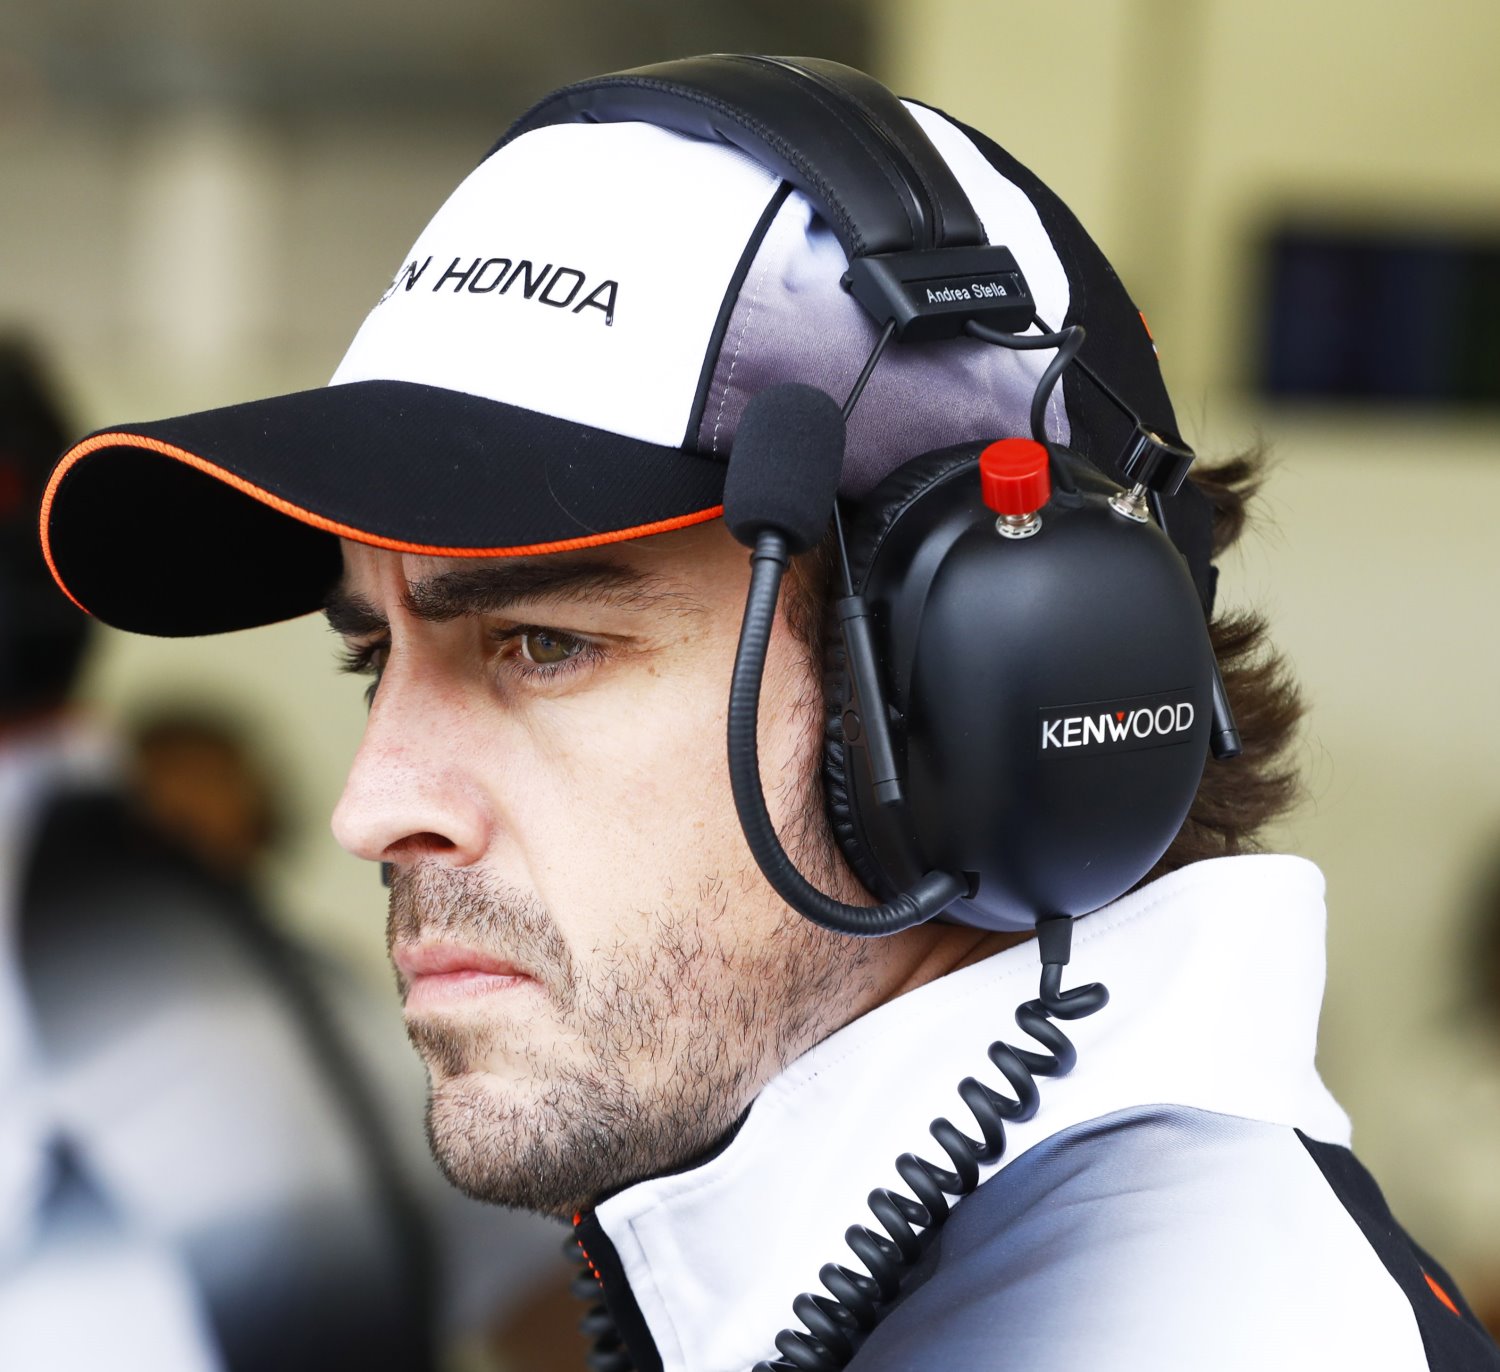 Alonso serious about good team